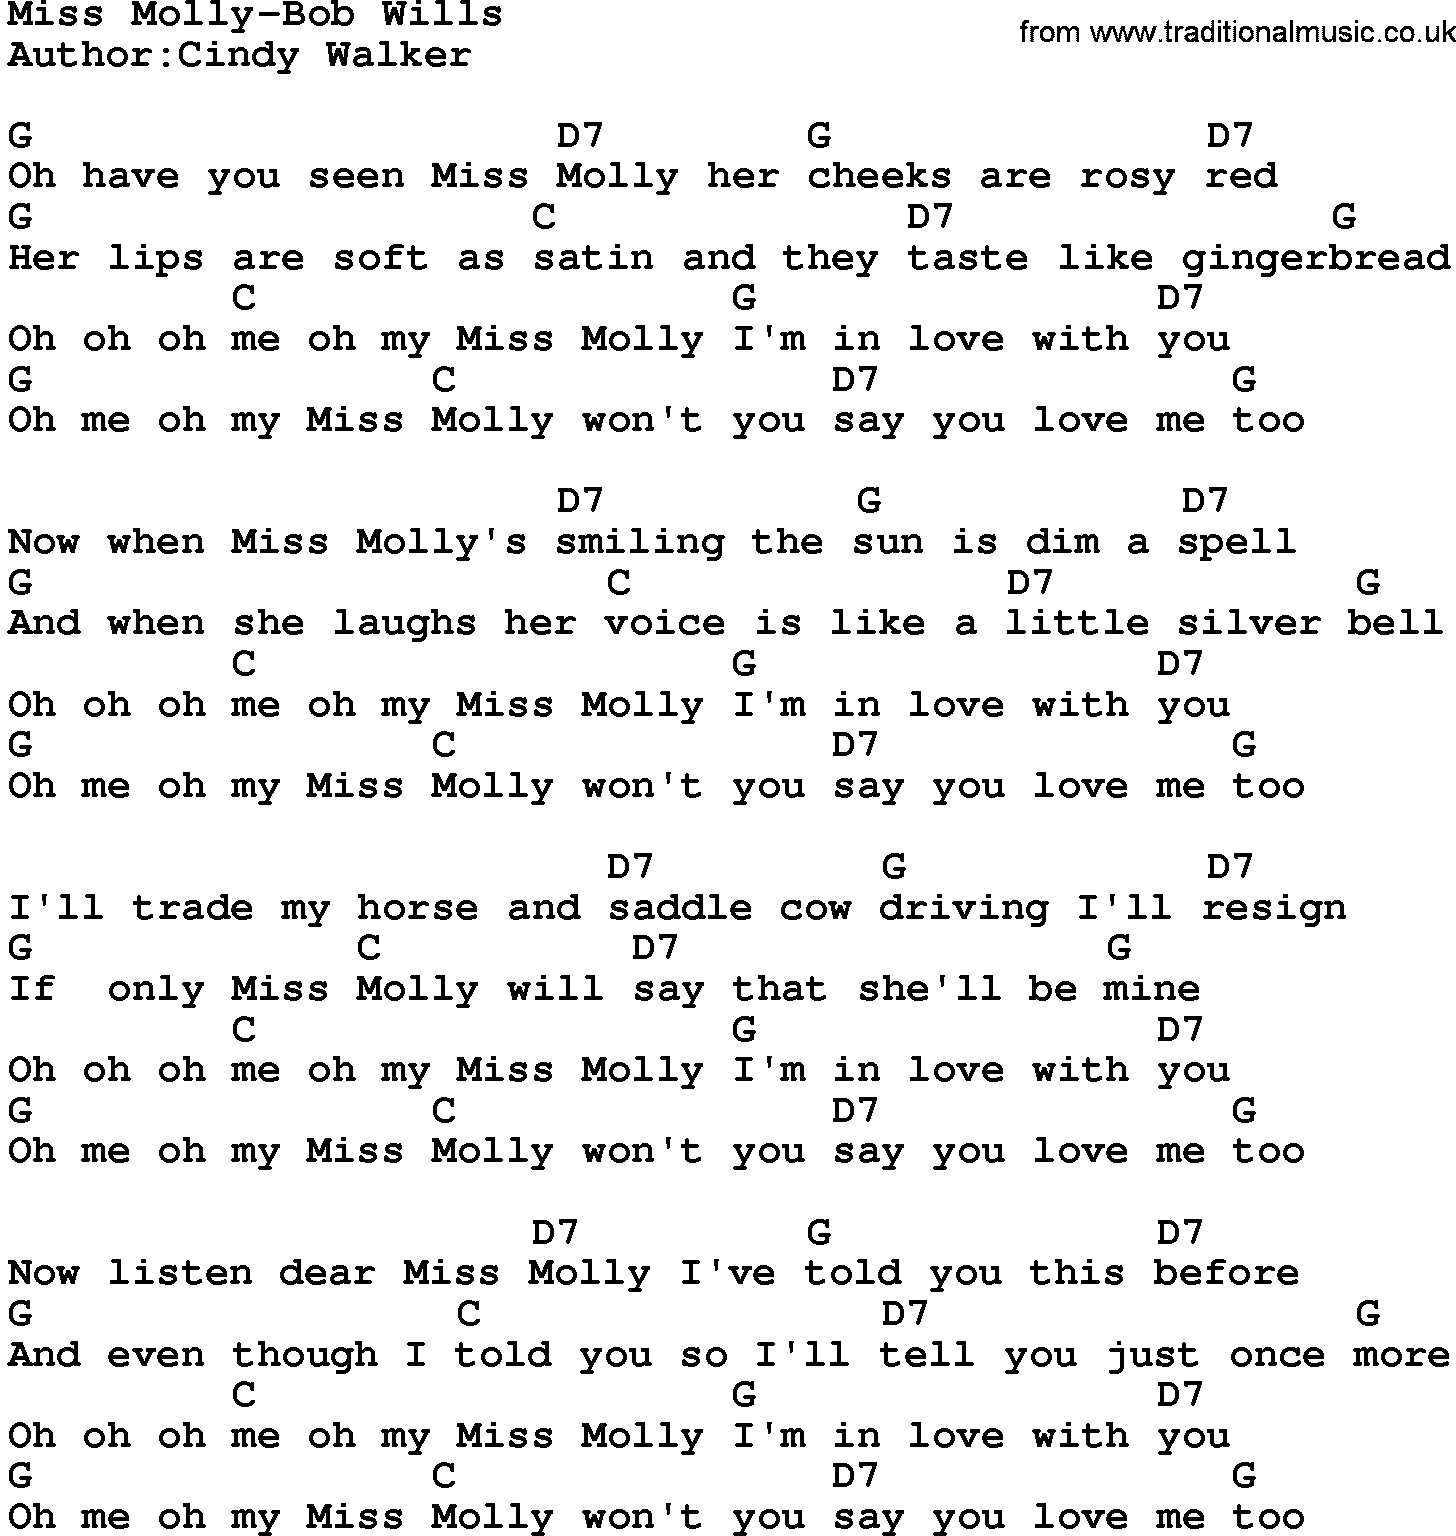 Country music song: Miss Molly-Bob Wills lyrics and chords